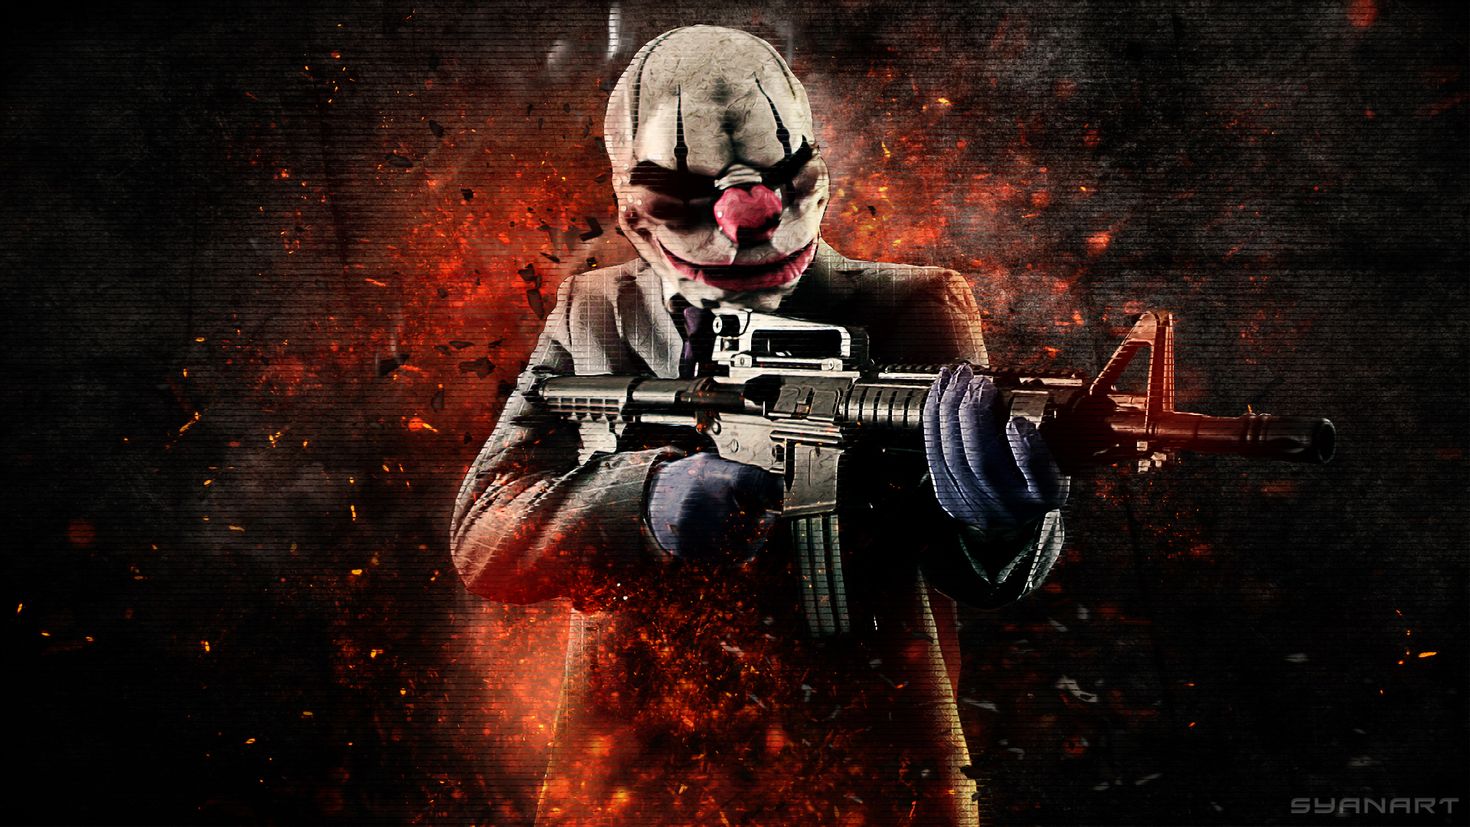 Chains payday 2